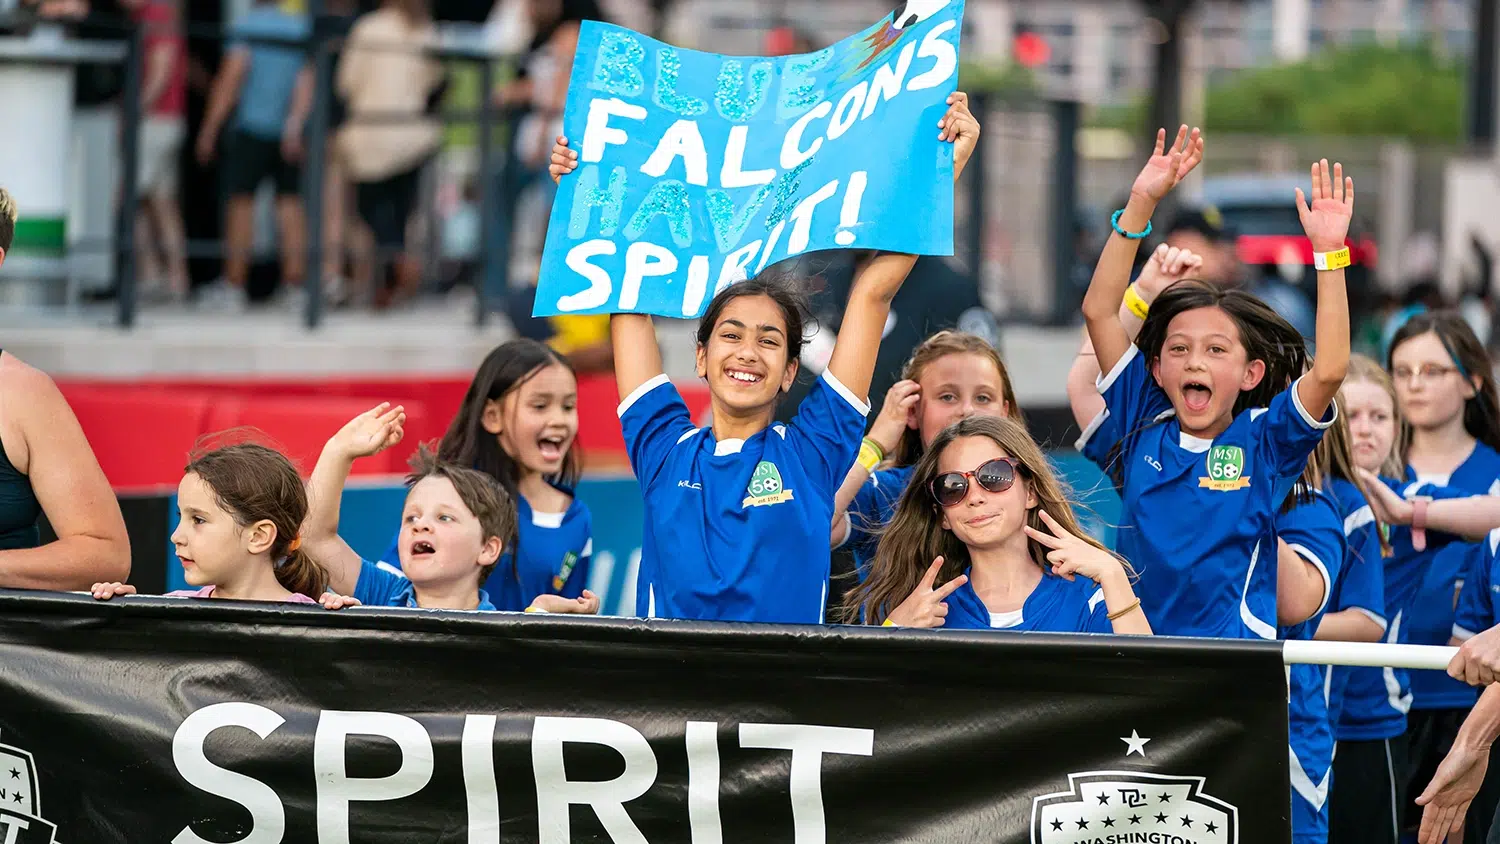 Young girls in matching blue soccer uniforms cheer. The girl in the middle holds up a poster that reads 